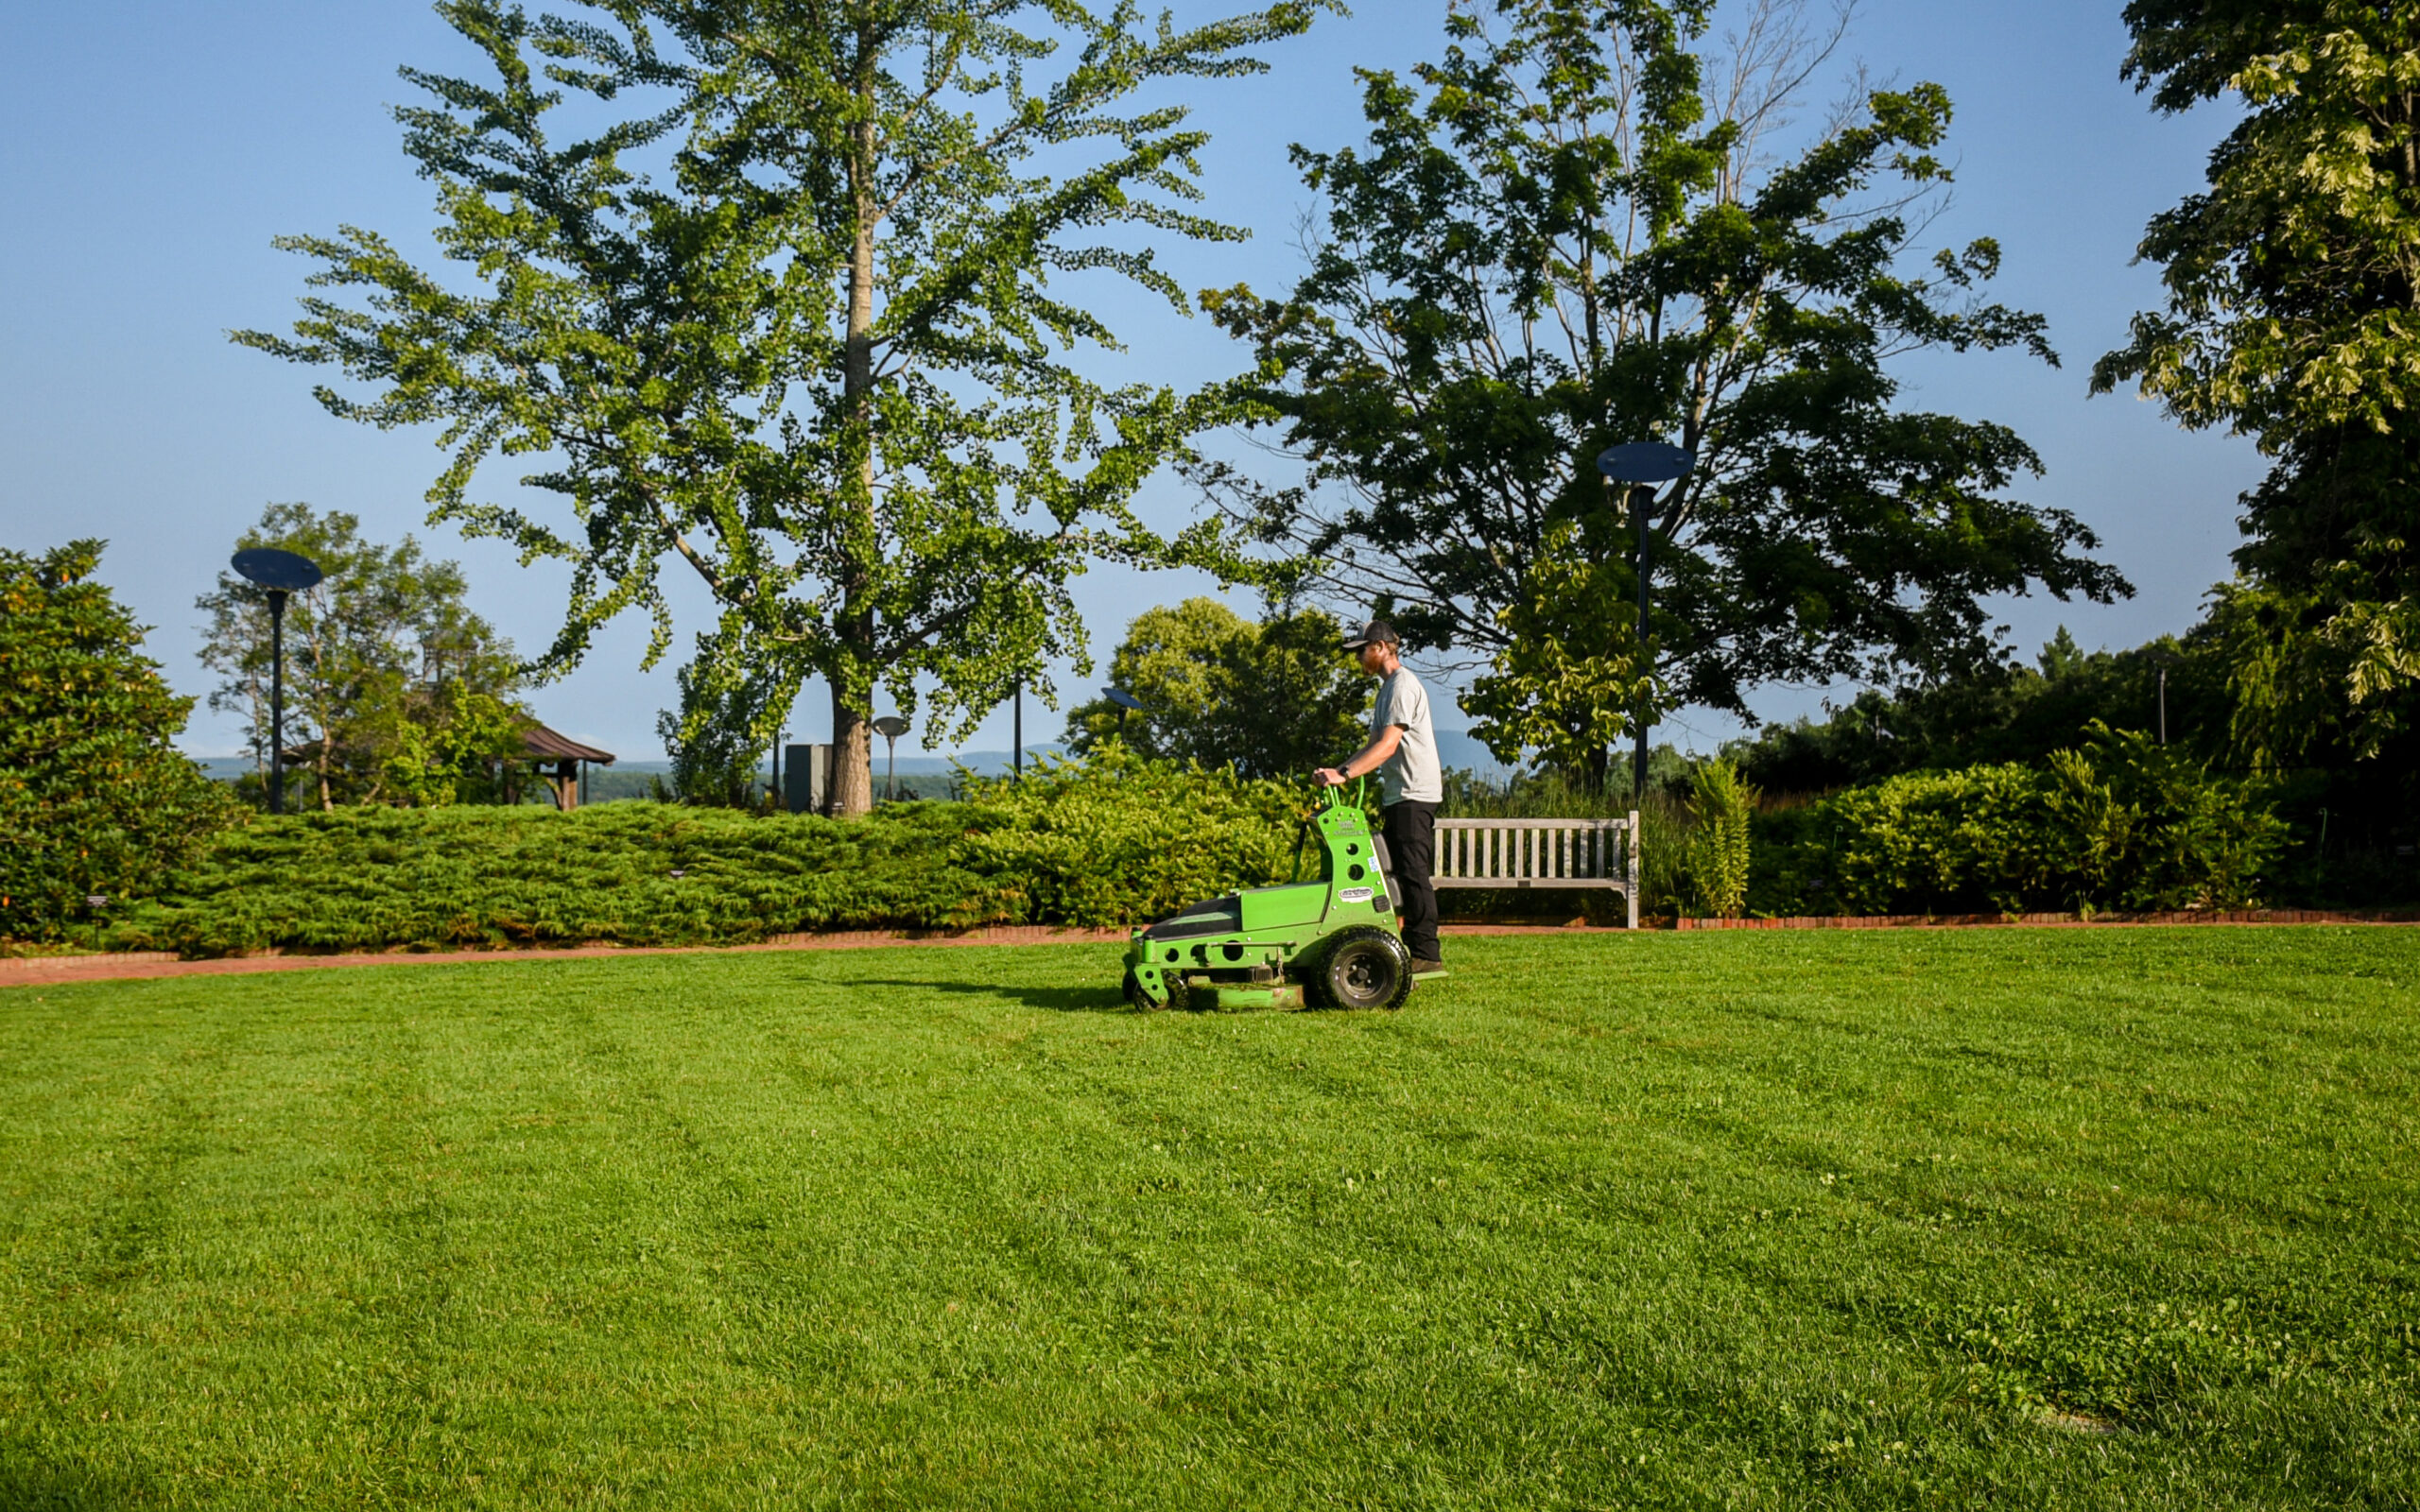 Electric mower used to mow turf grasses throughout property.